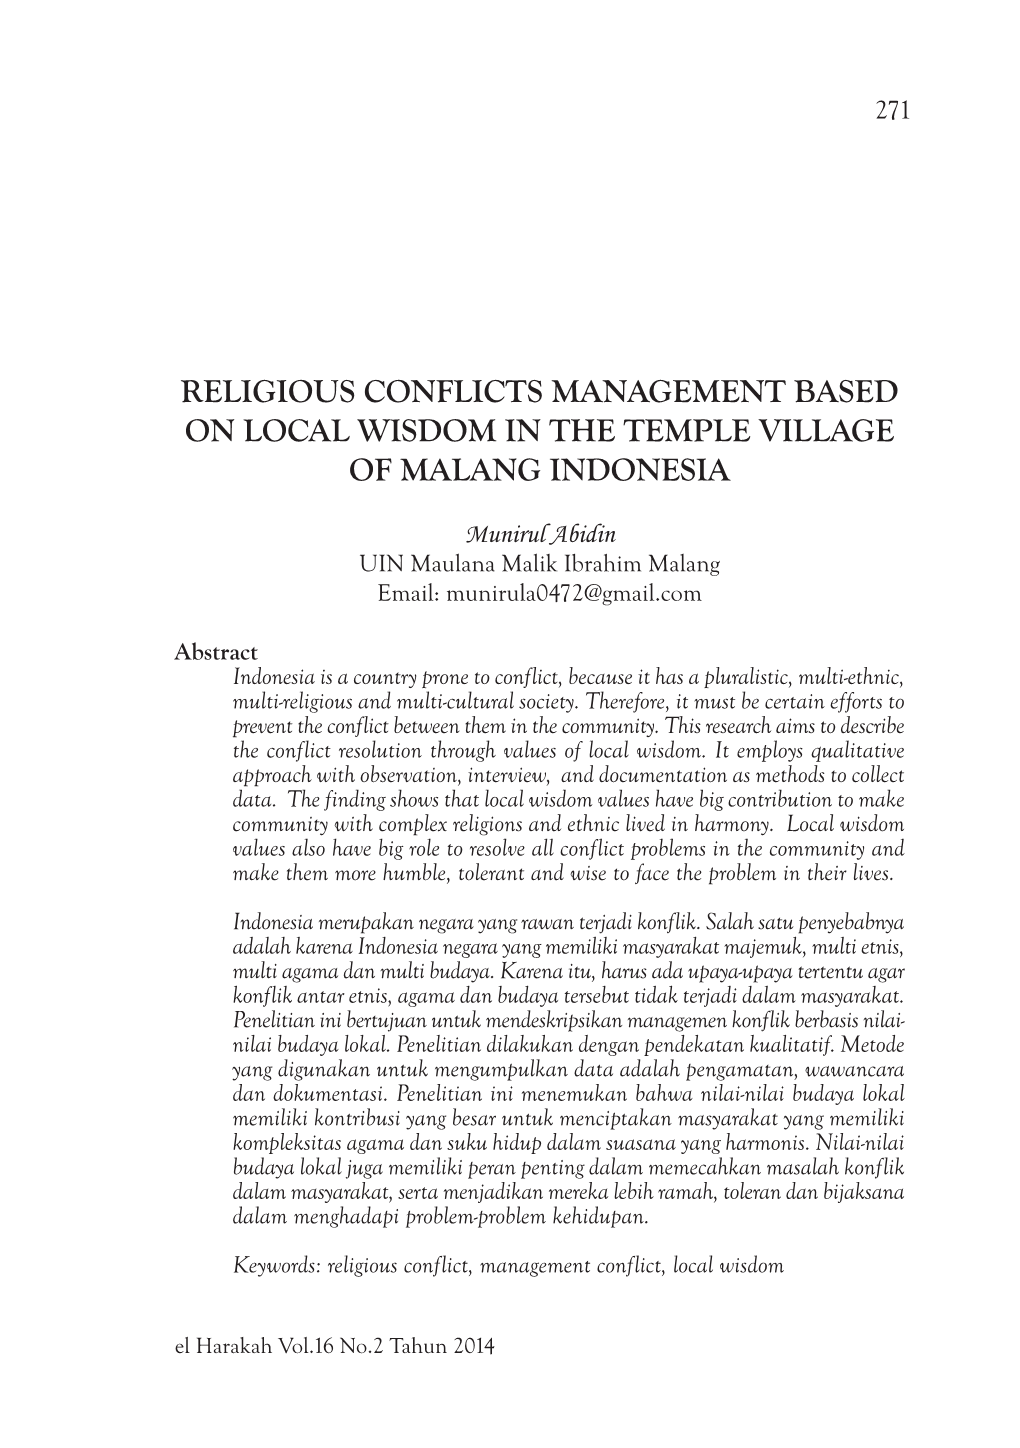 RELIGIOUS CONFLICTS MANAGEMENT BASED on LOCAL WISDOM in the Temple Village of MALANG INDONESIA